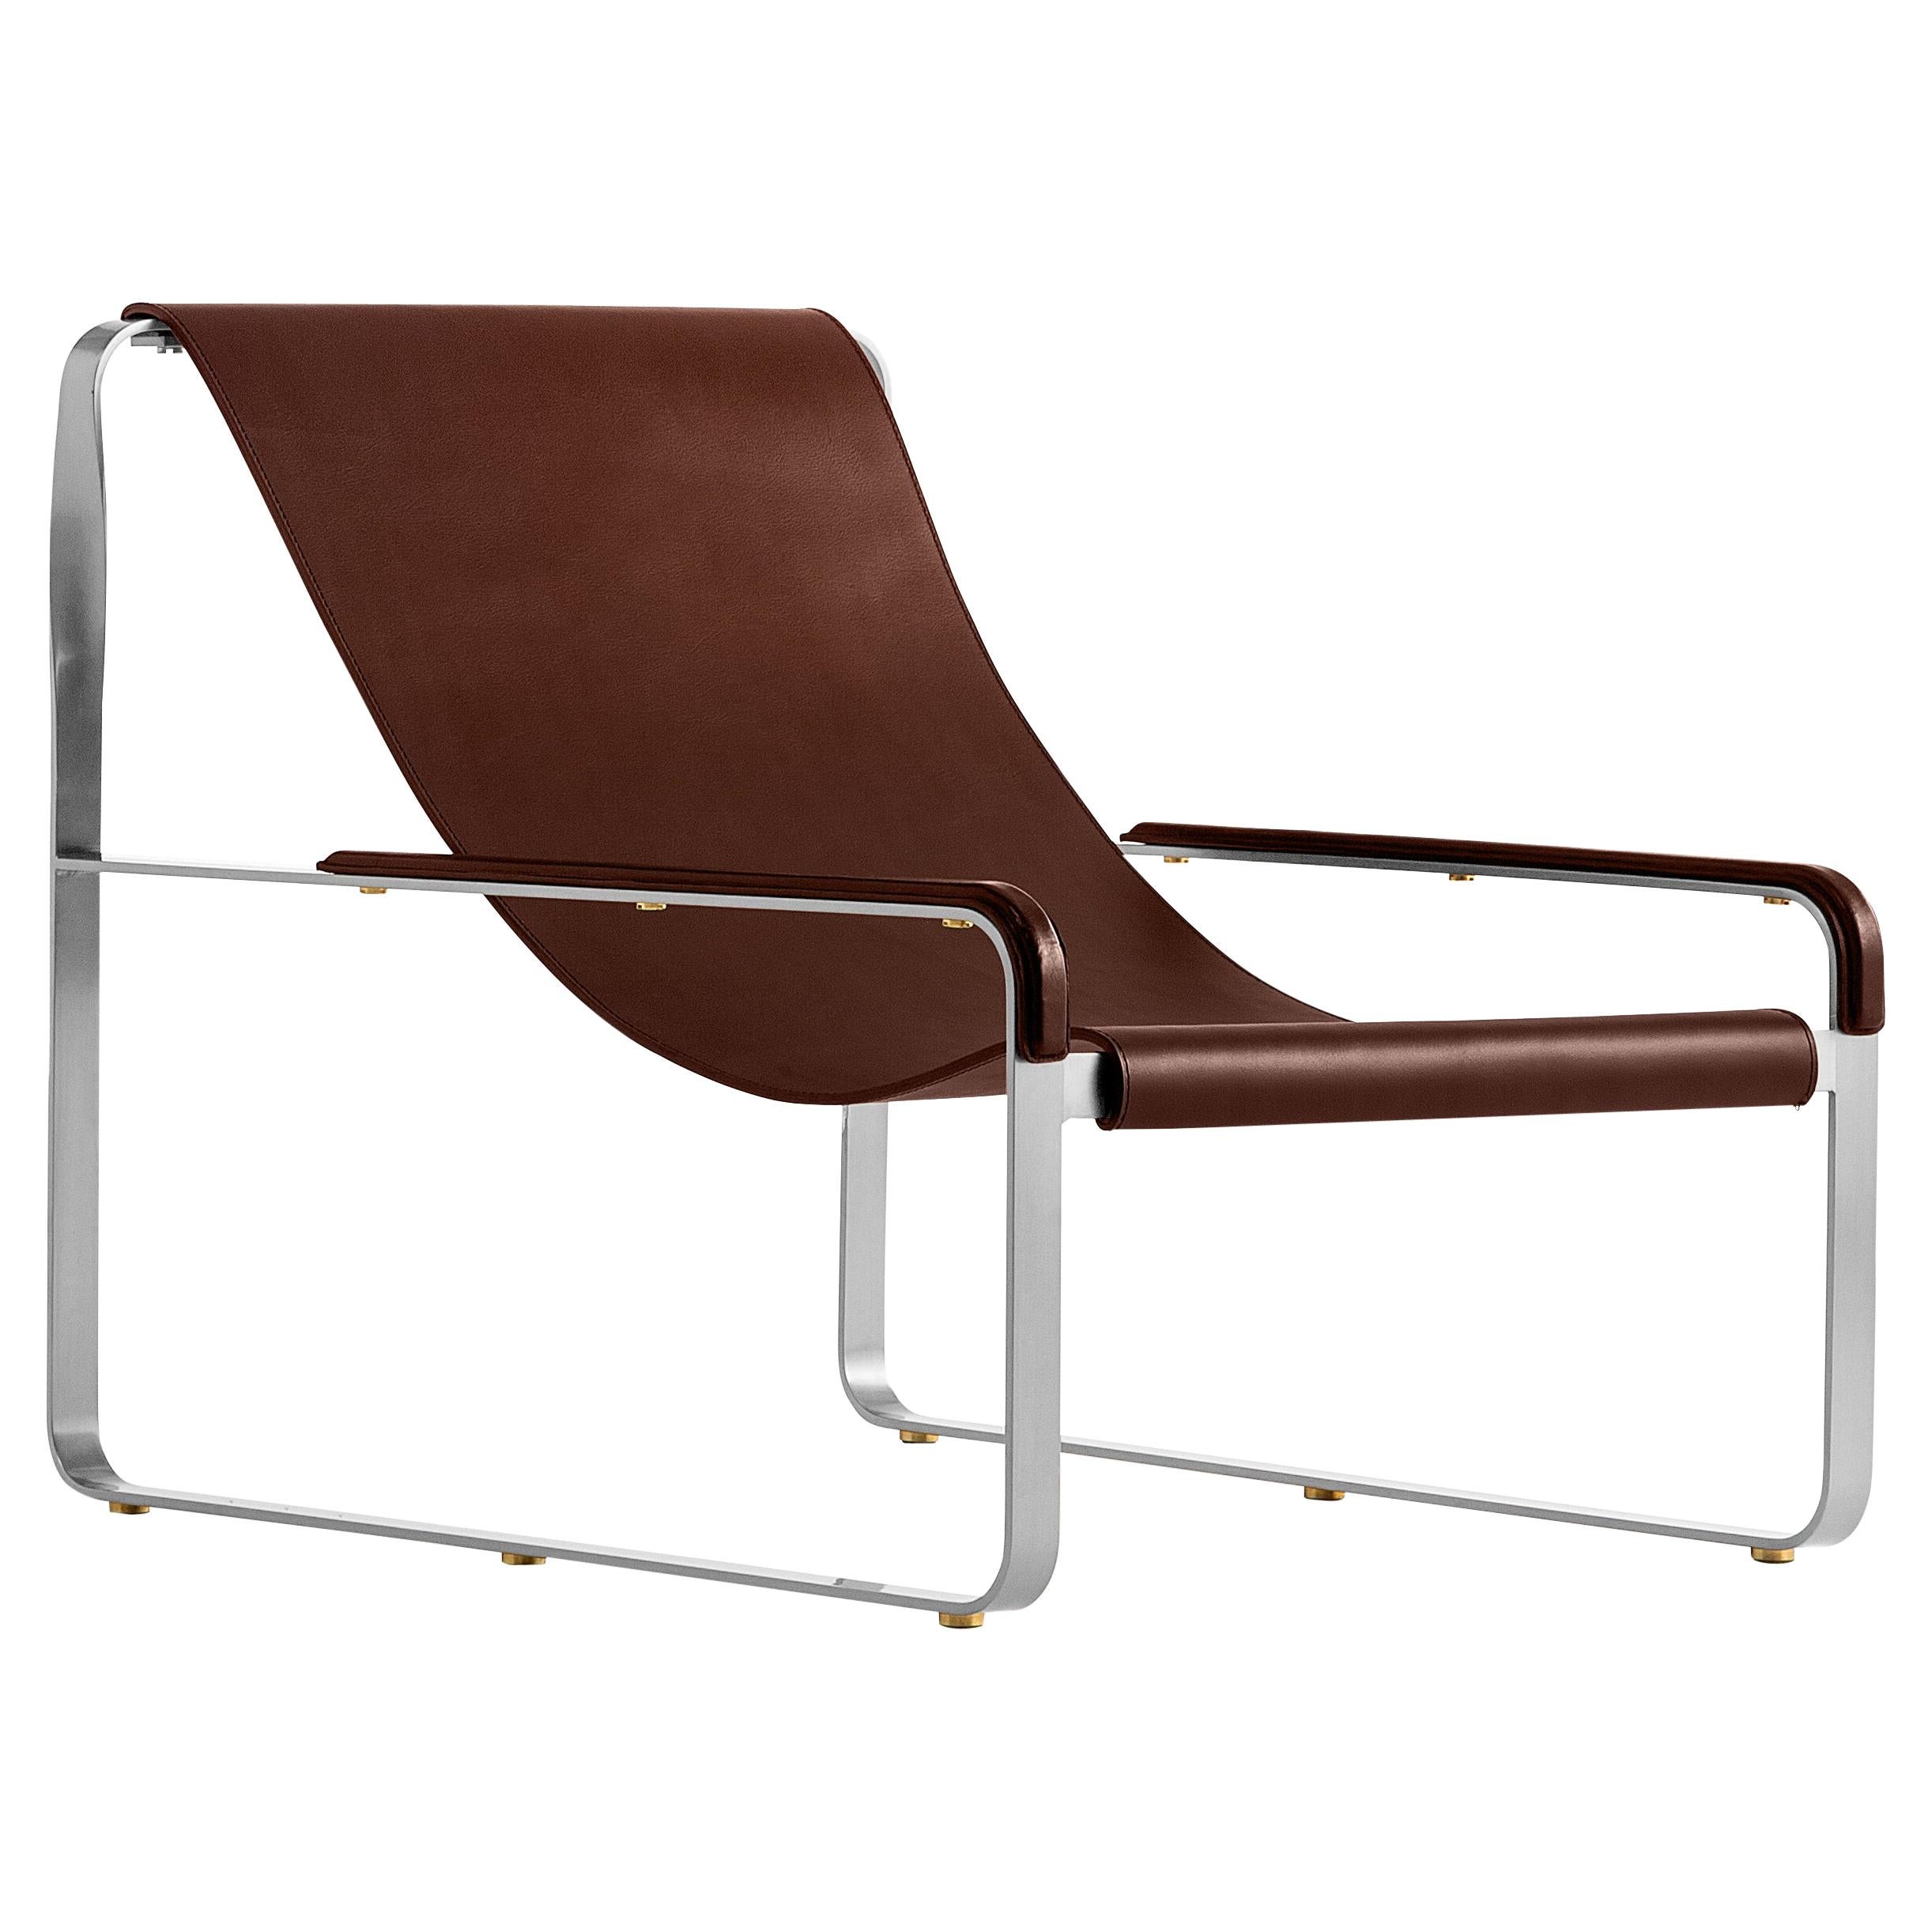 Artisan Made Contemporary Chaise Lounge Old Silver Steel & Dark Brown Leather For Sale